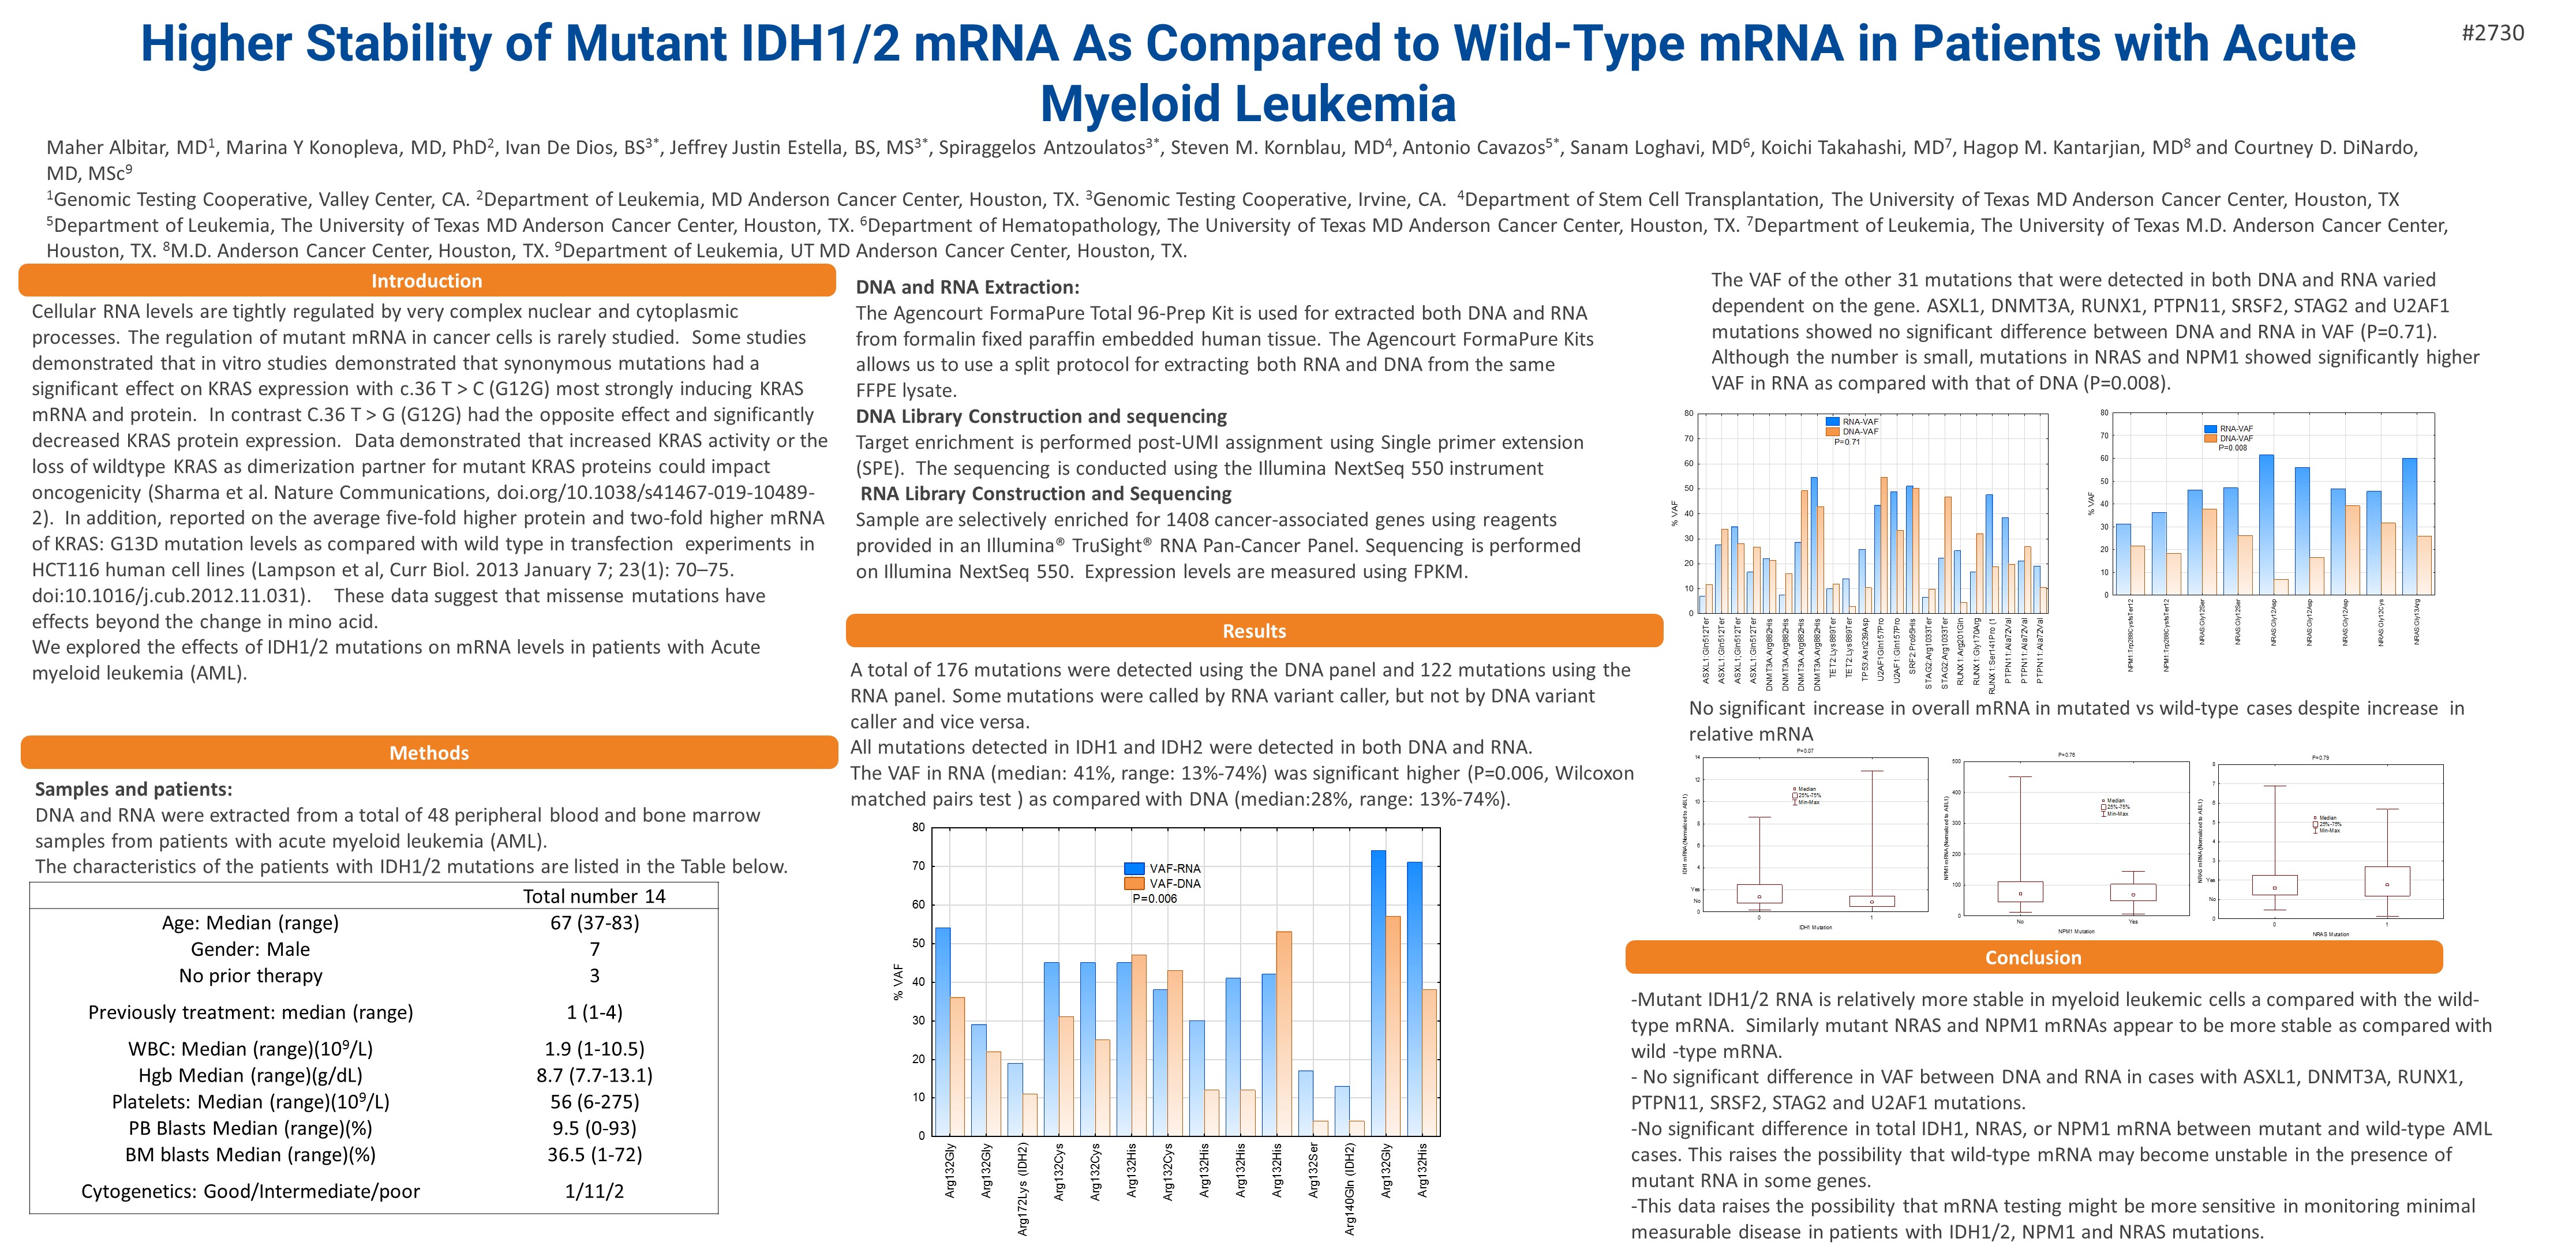 Higher Stability of Mutant IDH1/2 mRNA As Compared to Wild-Type mRNA in Patients with Acute Myeloid Leukemia 